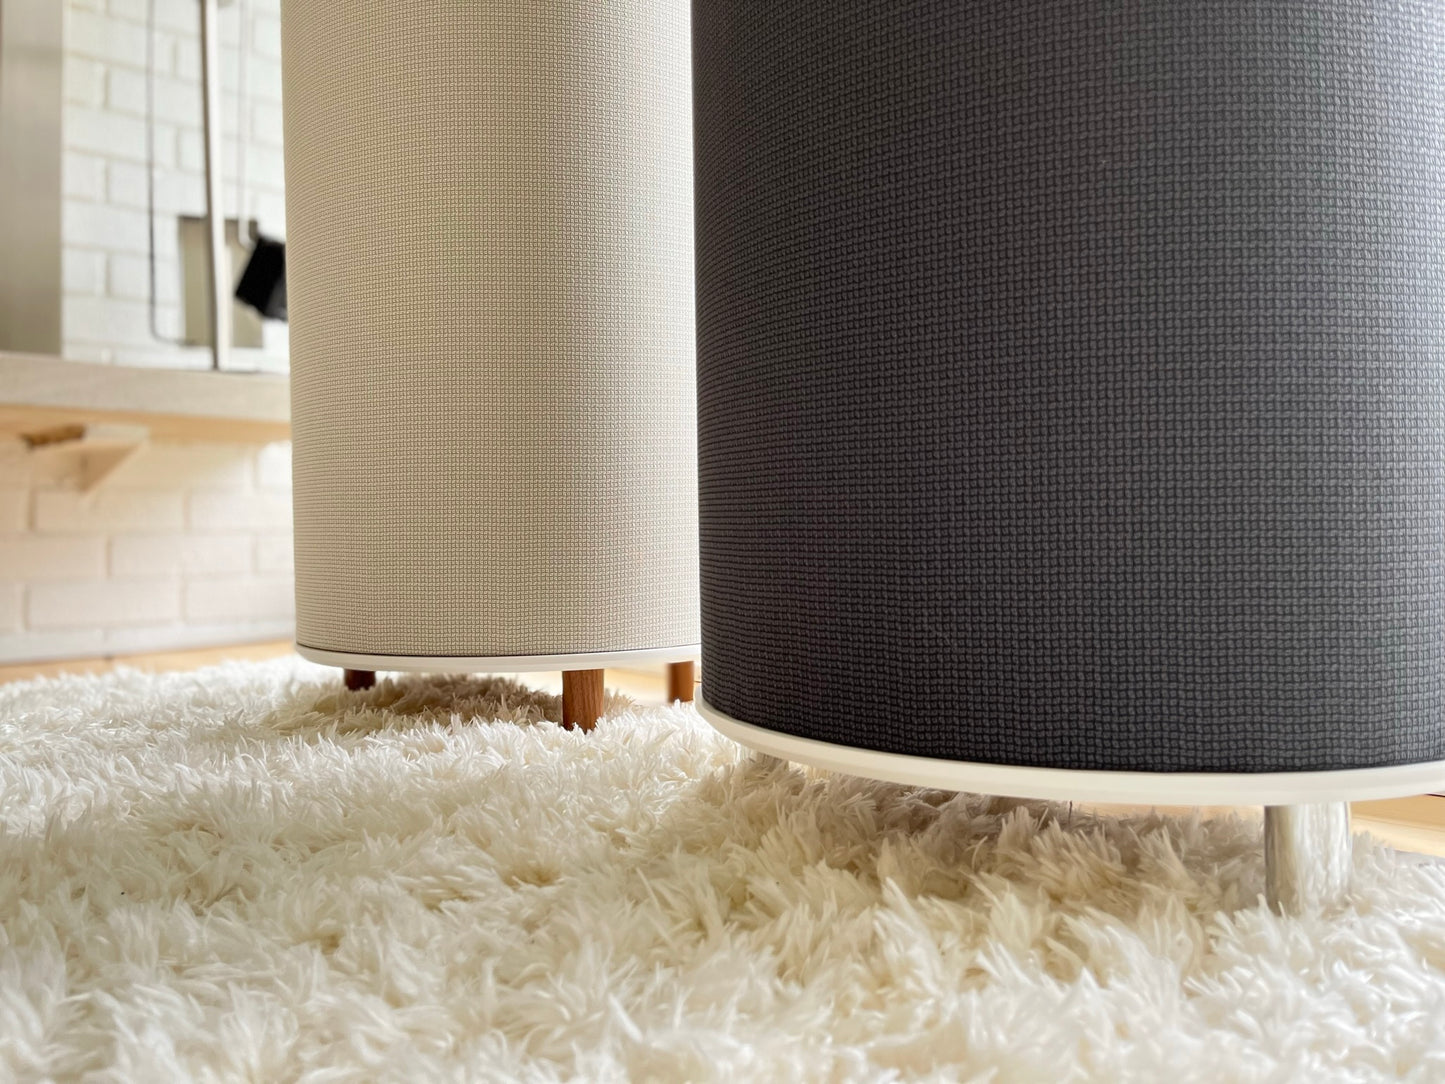 Phillips Design OH-16 speakers with wood or metal legs